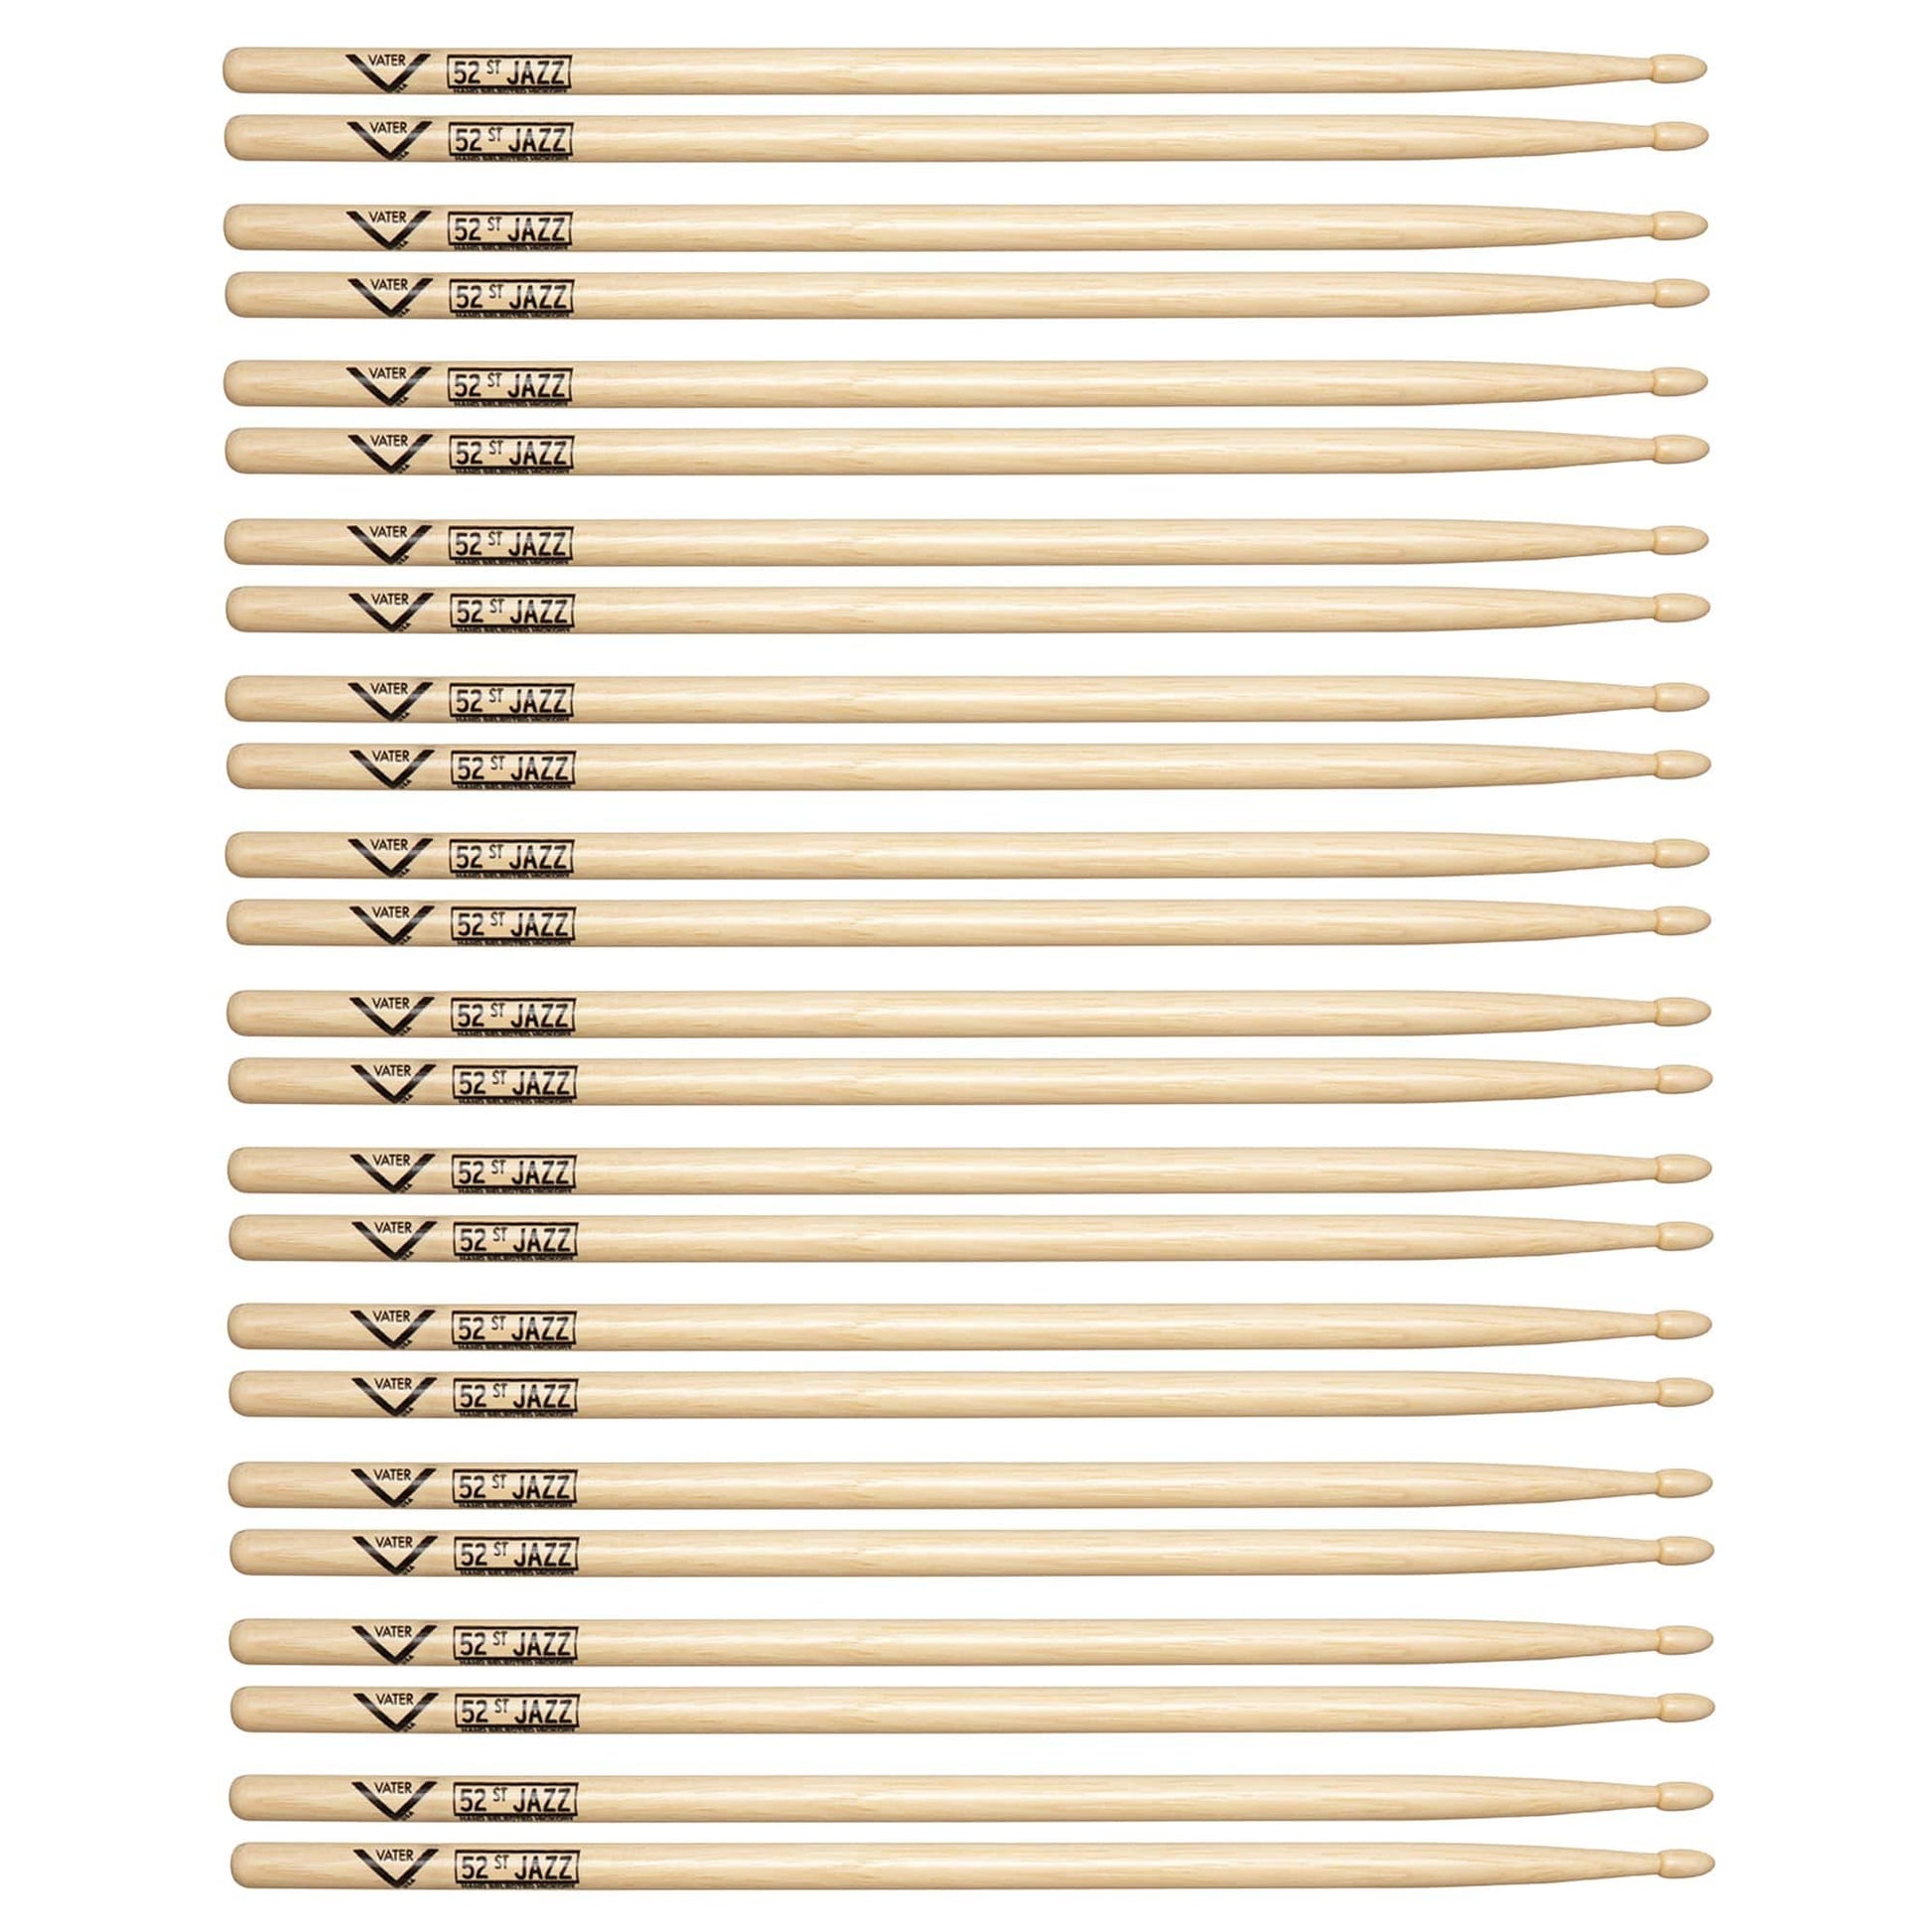 Vater 52nd St Jazz Drum Sticks (12 Pair Bundle) Drums and Percussion / Parts and Accessories / Drum Sticks and Mallets